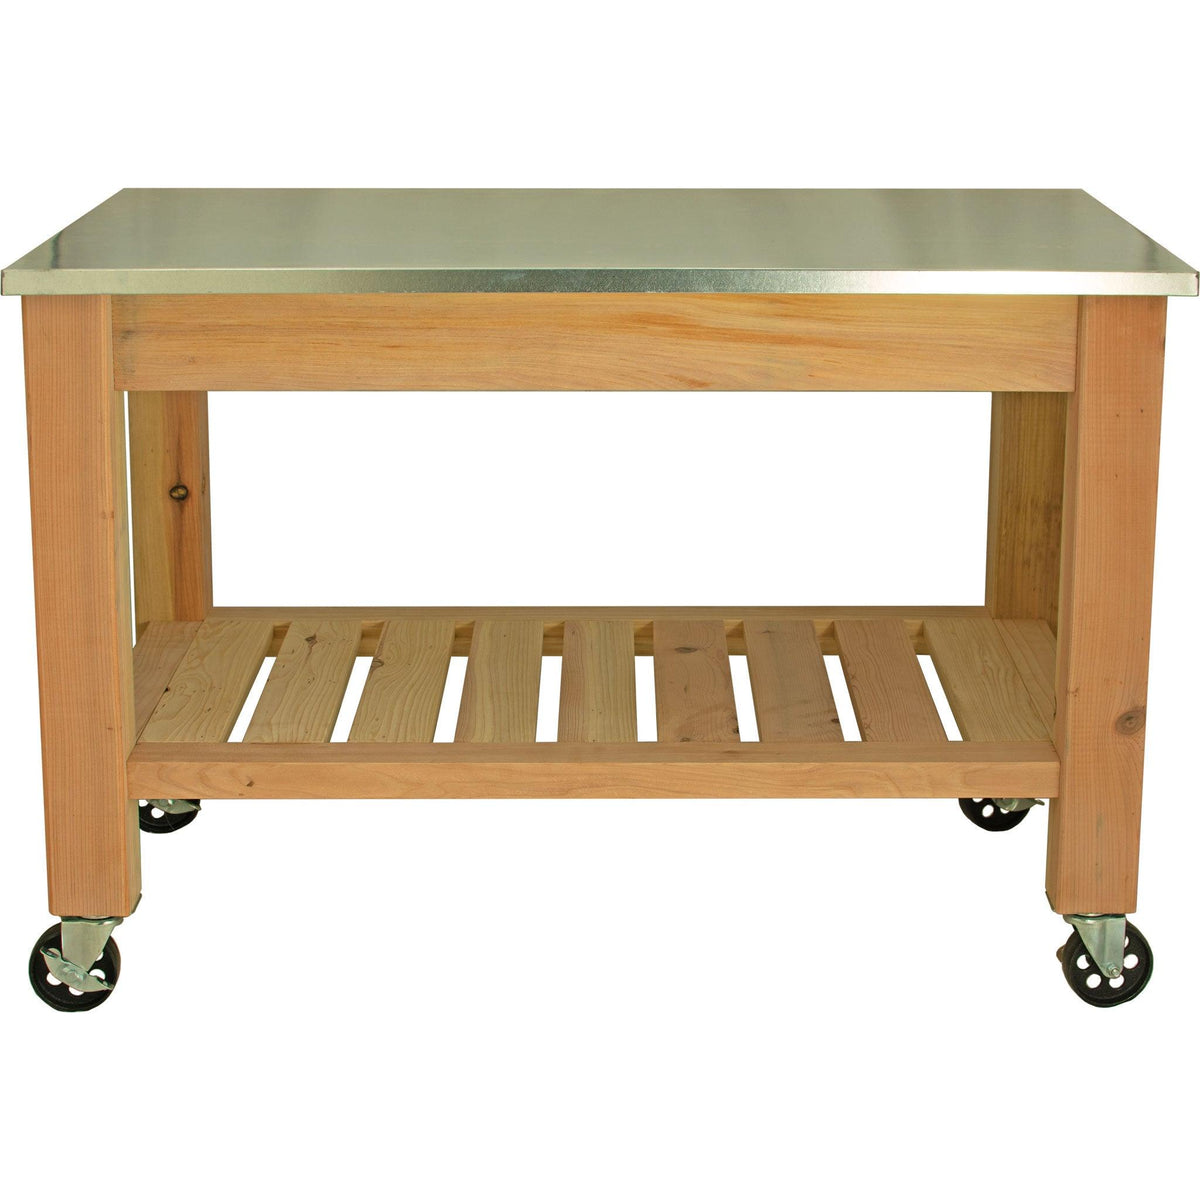 Introducing the brand-new Modern Garden Potting Table from Lee Display 